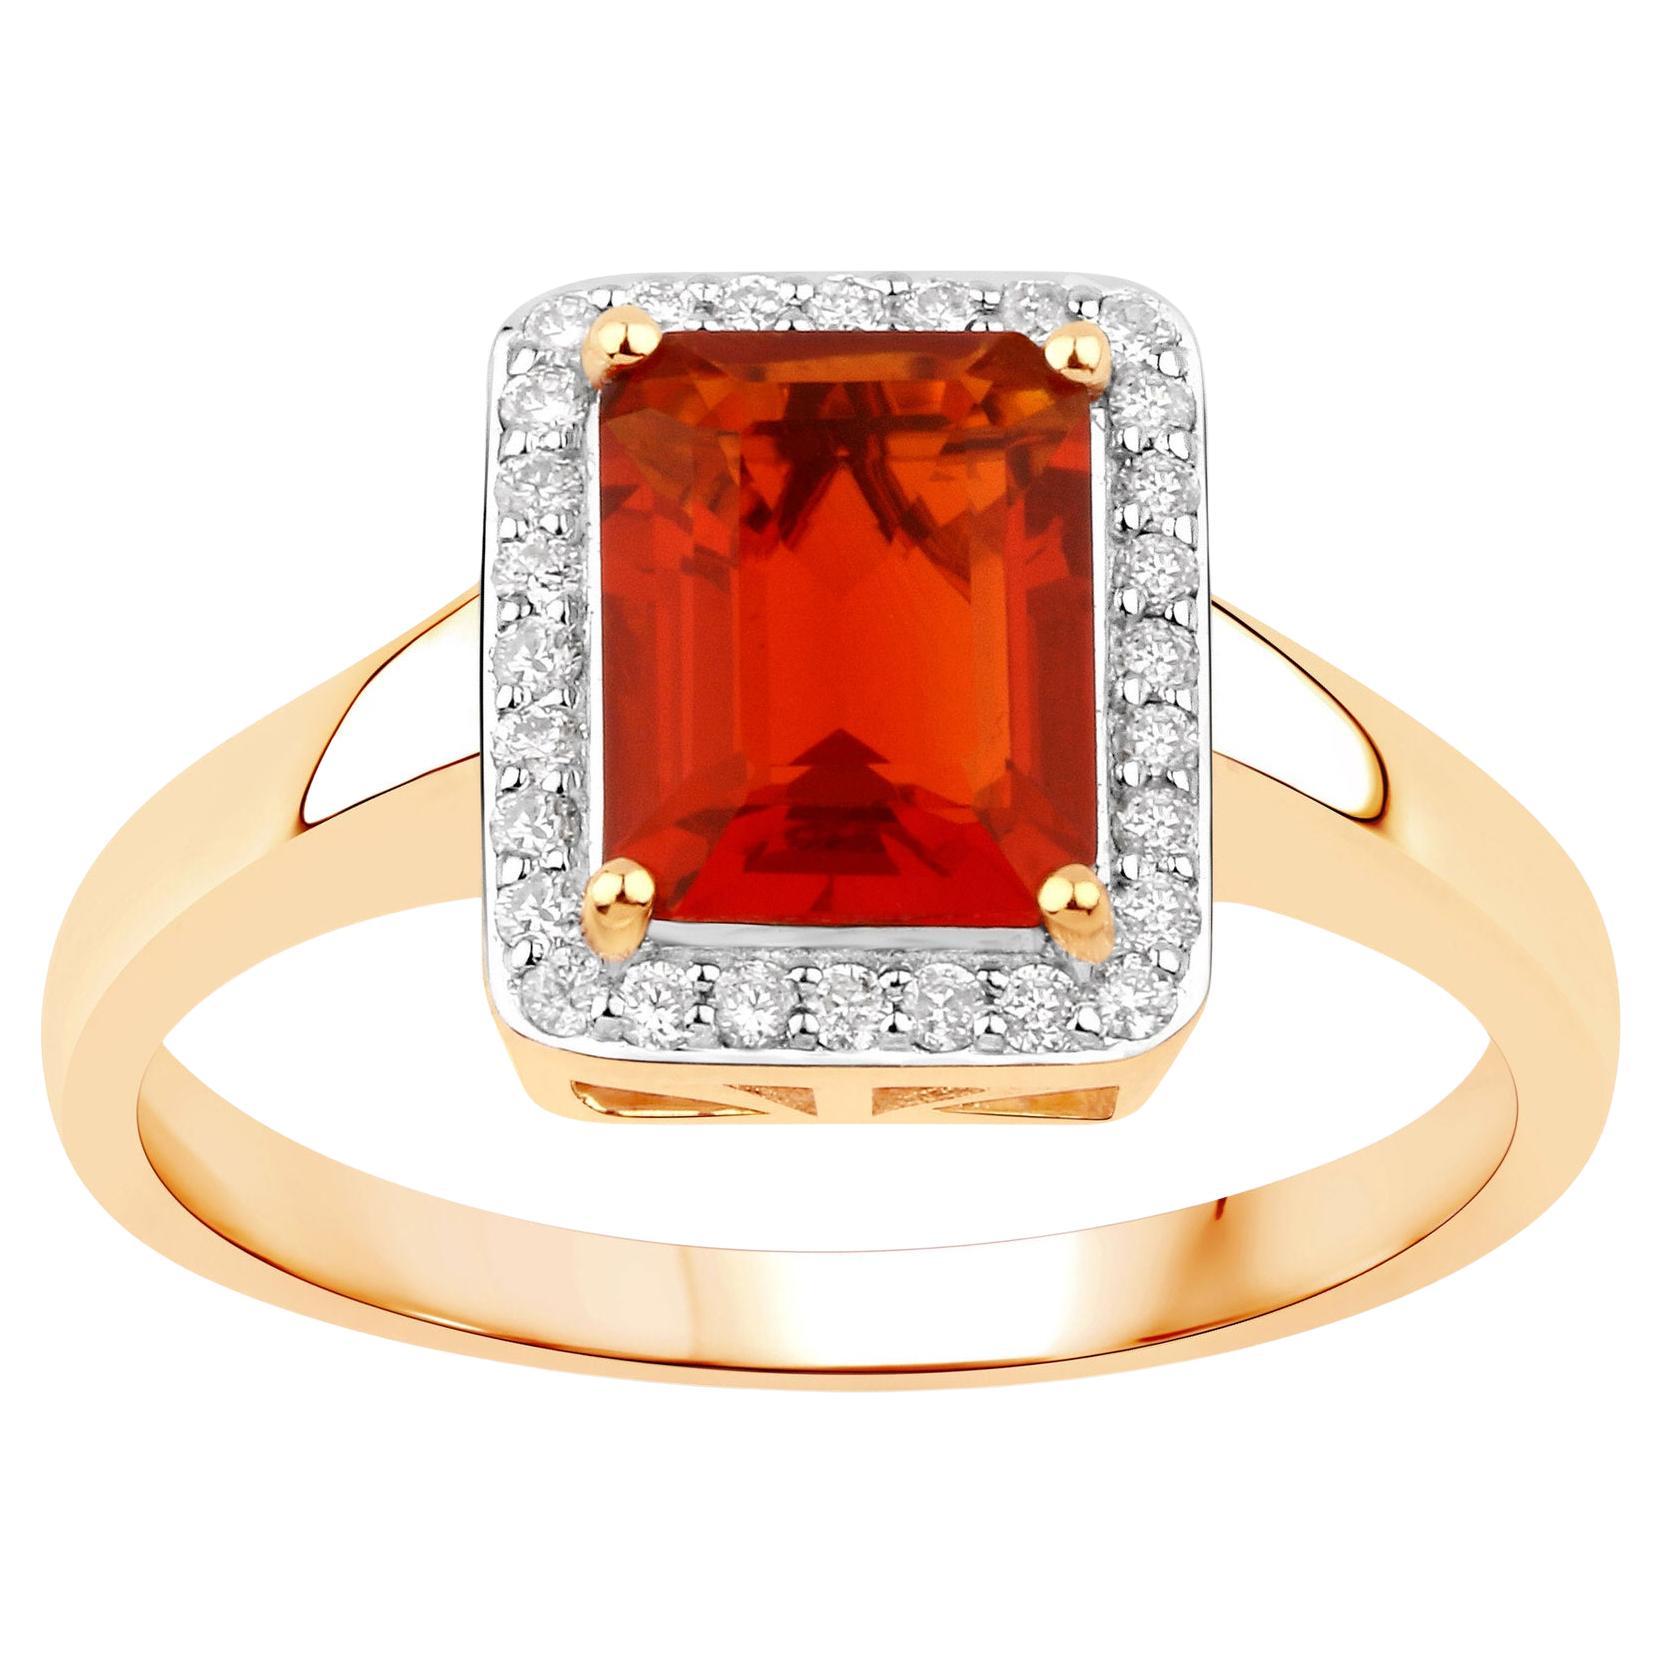 Natural Fire Opal and Diamond Halo Ring 1.20 Carats 14K Yellow Gold